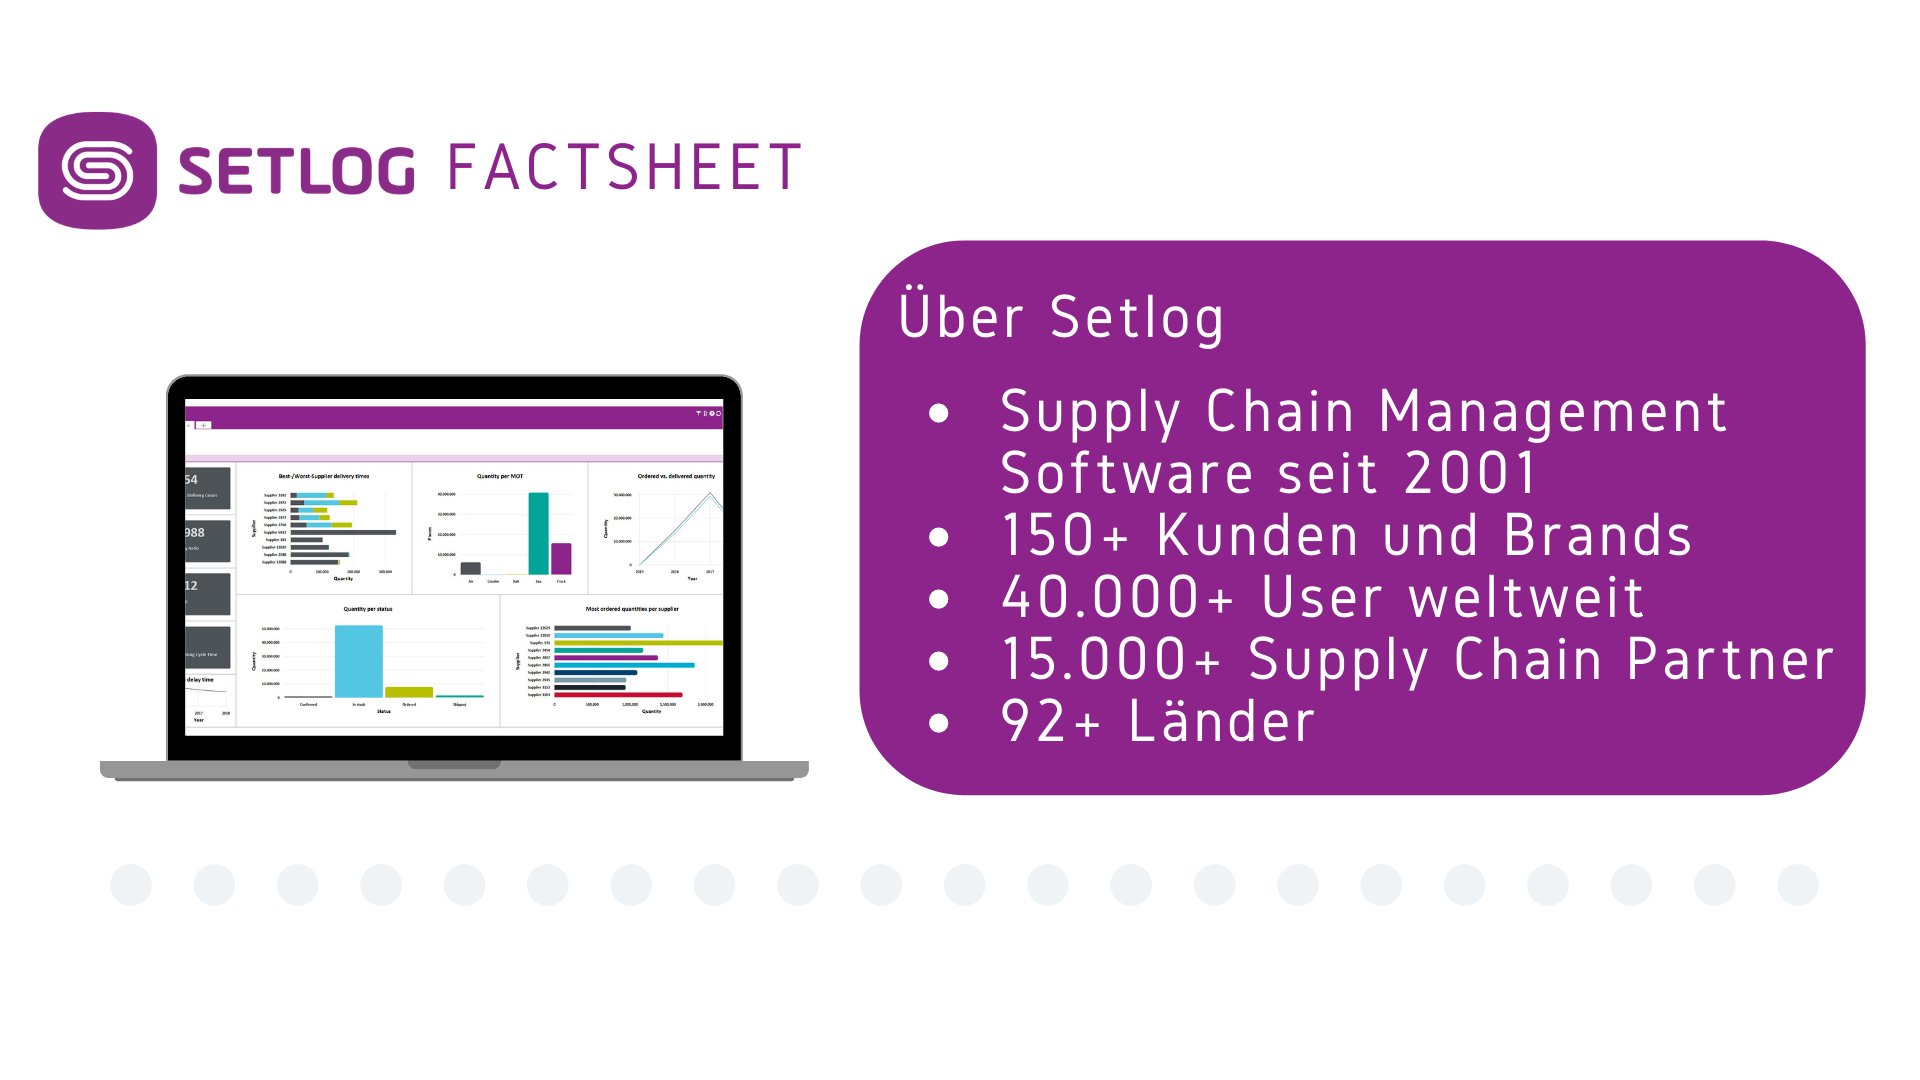 Setlog factsheet for Supply Chain News shown on a laptop display. Next to it a few facts about Setlog as a company